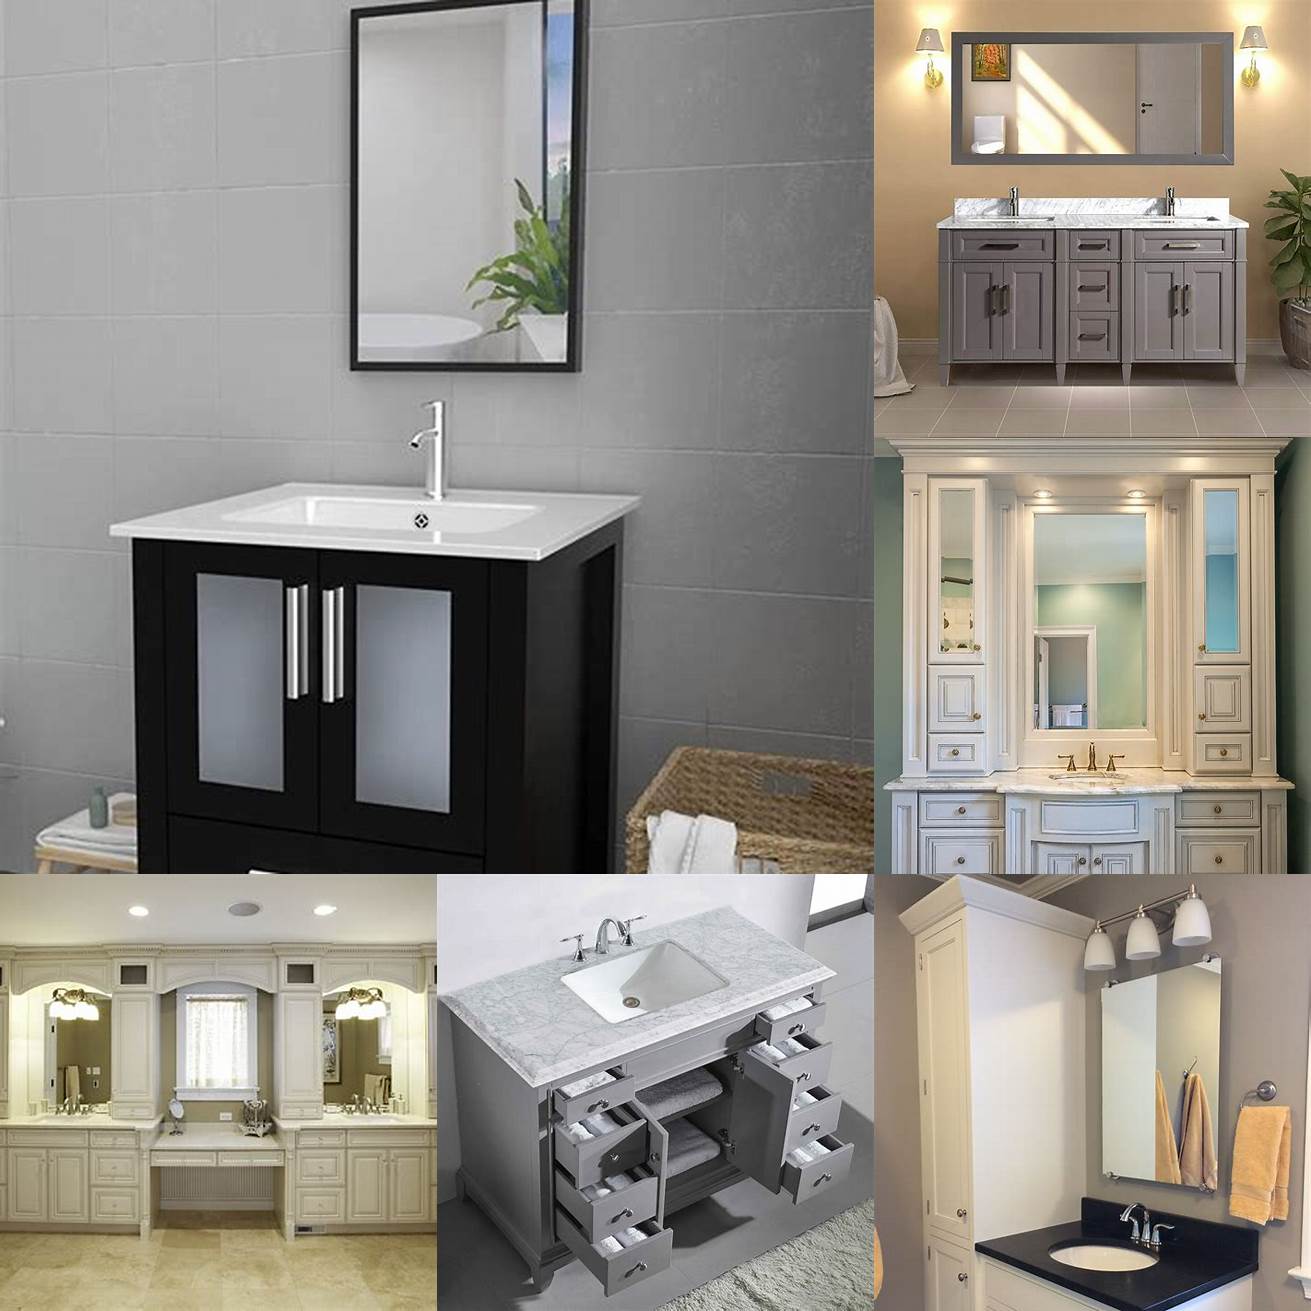 Add the bathroom vanity to your cart and proceed to checkout